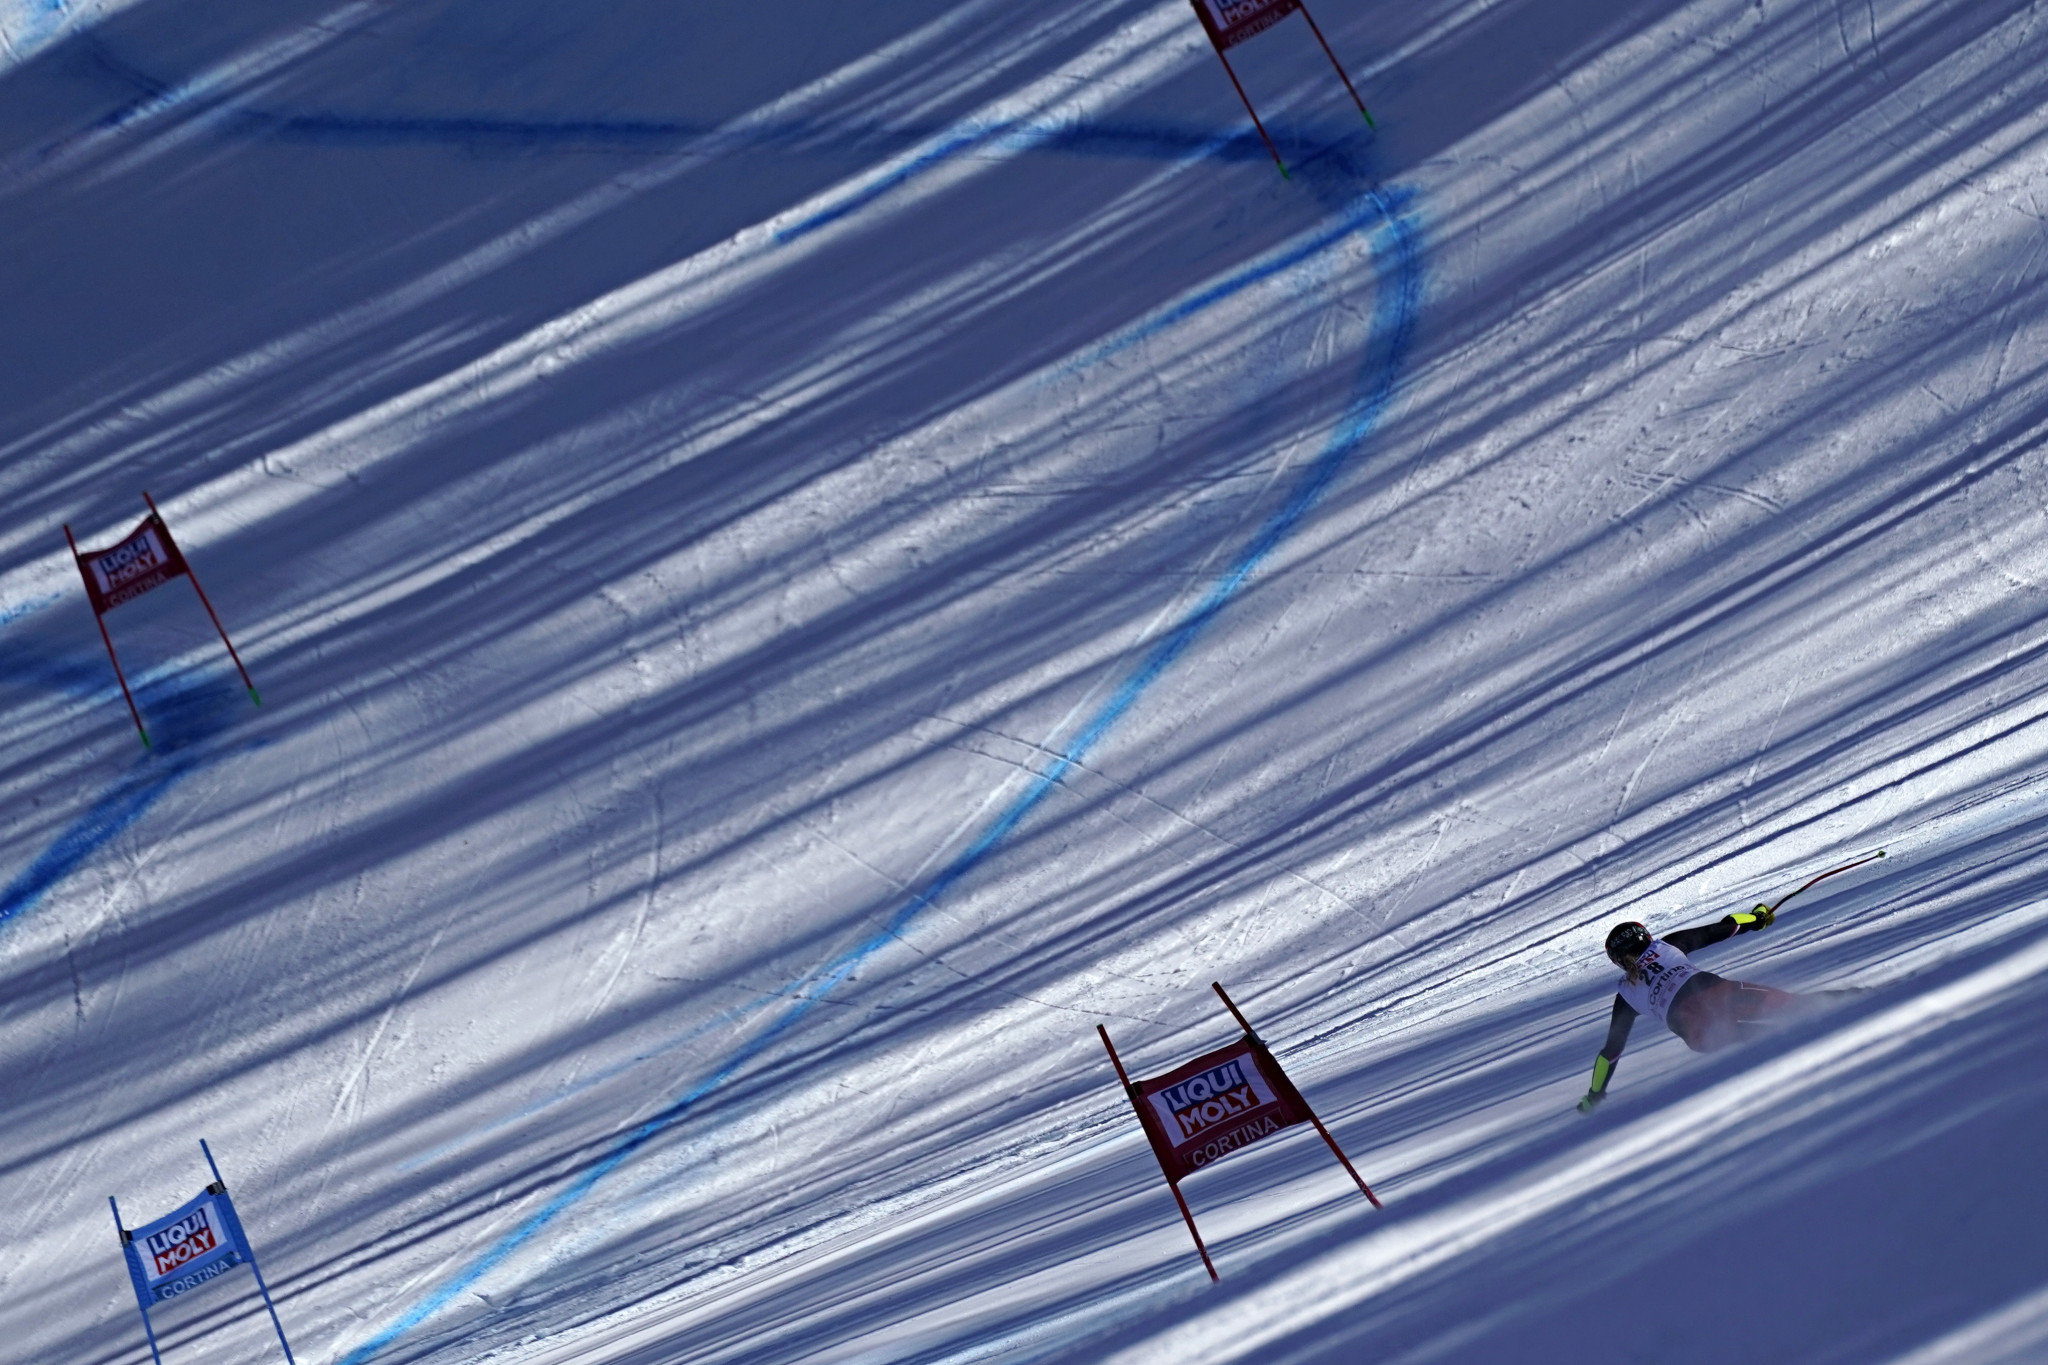 Cortina is scheduled to host the Alpine World Ski Championships in February ©Getty Images